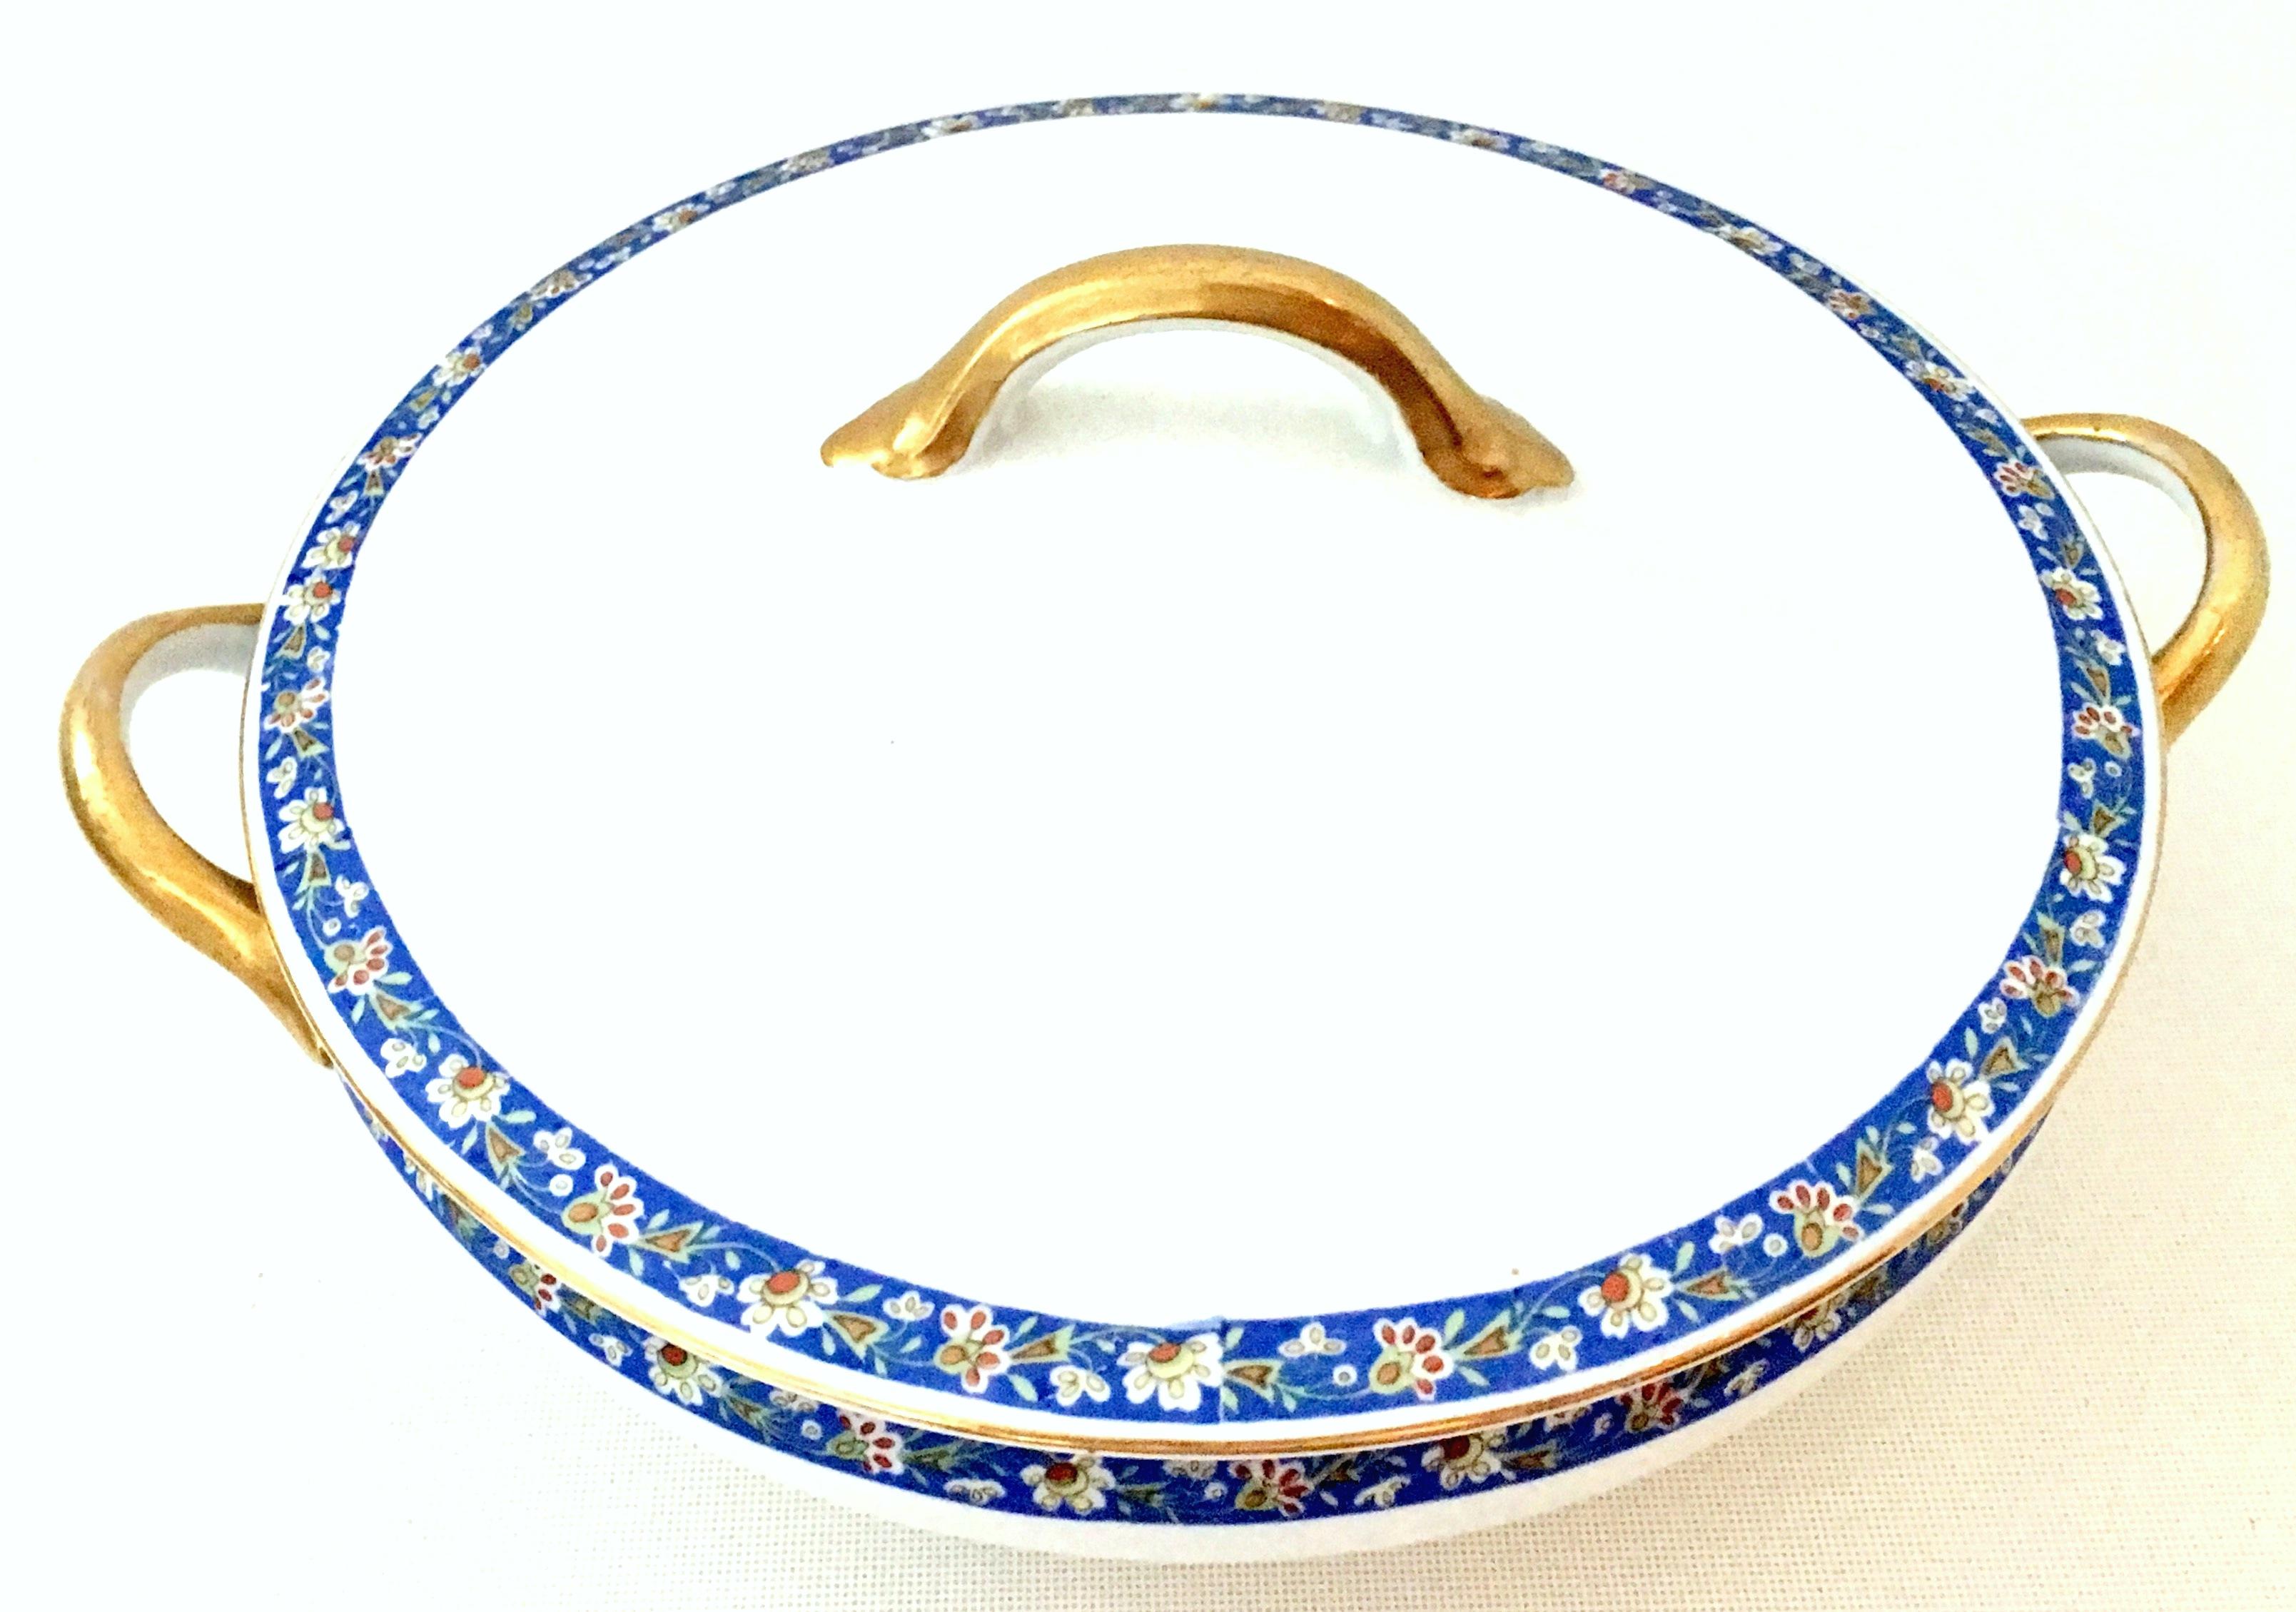 1930s Art Deco Japanese Porcelain and 22-Karat Gold Serving Piece, Set of 6 In Good Condition For Sale In West Palm Beach, FL